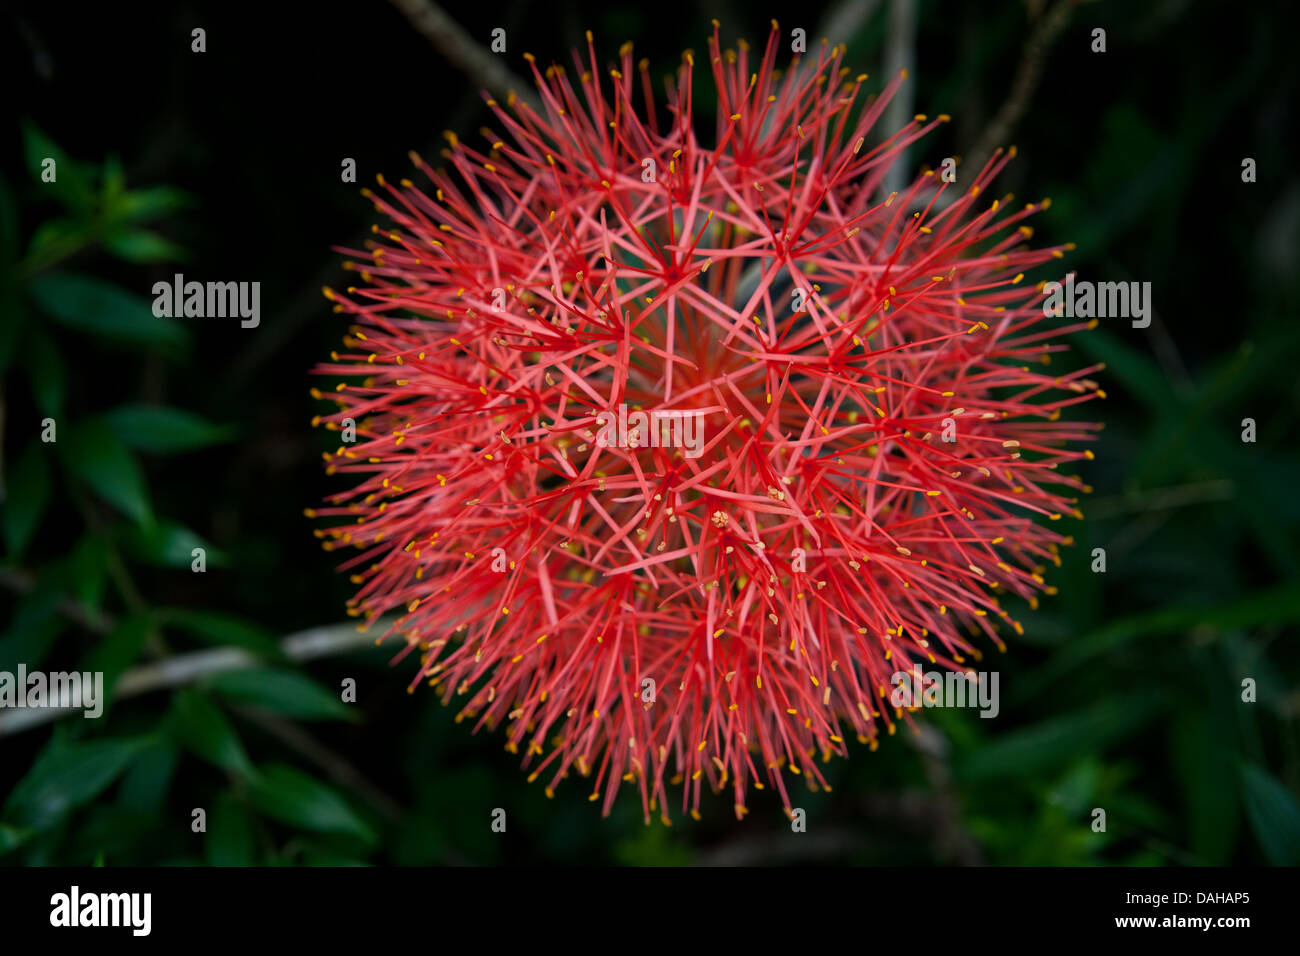 Blood lily flower, Scadoxus multiflorus, in a garden in Penonome, Cocle province, Republic of Panama. Stock Photo